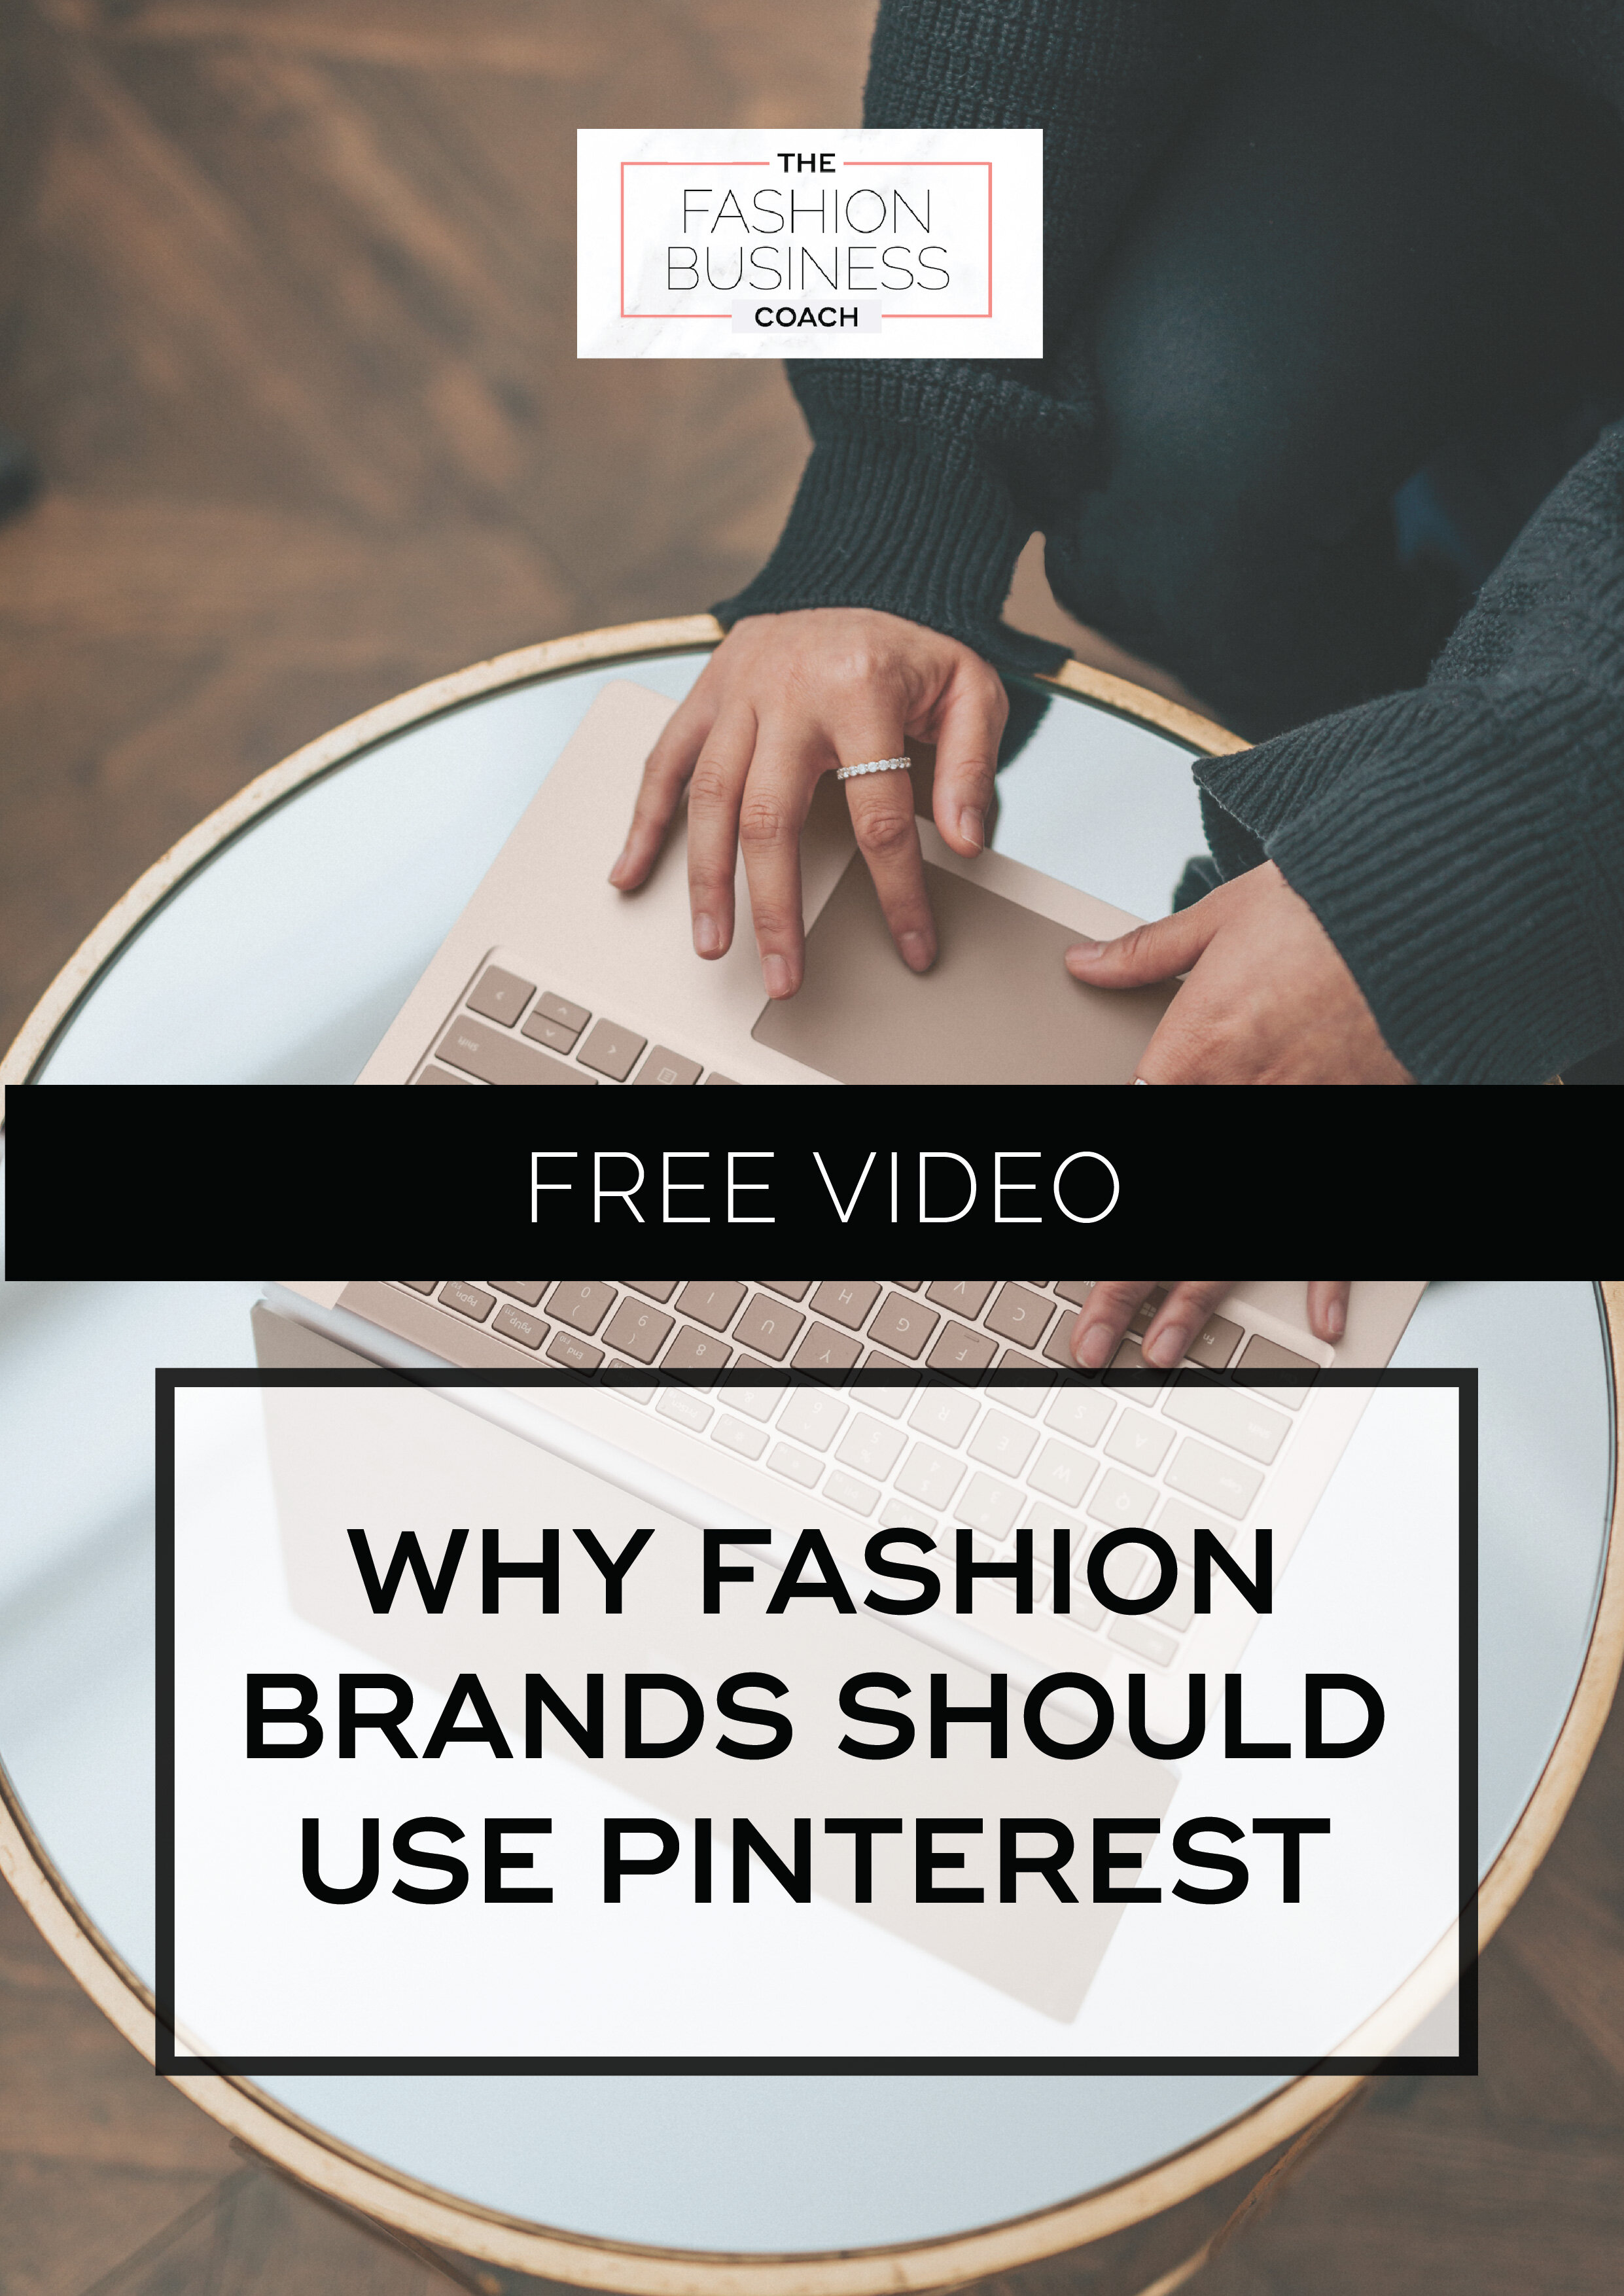 Why Fashion Brands Should Use Pinterest2.jpg